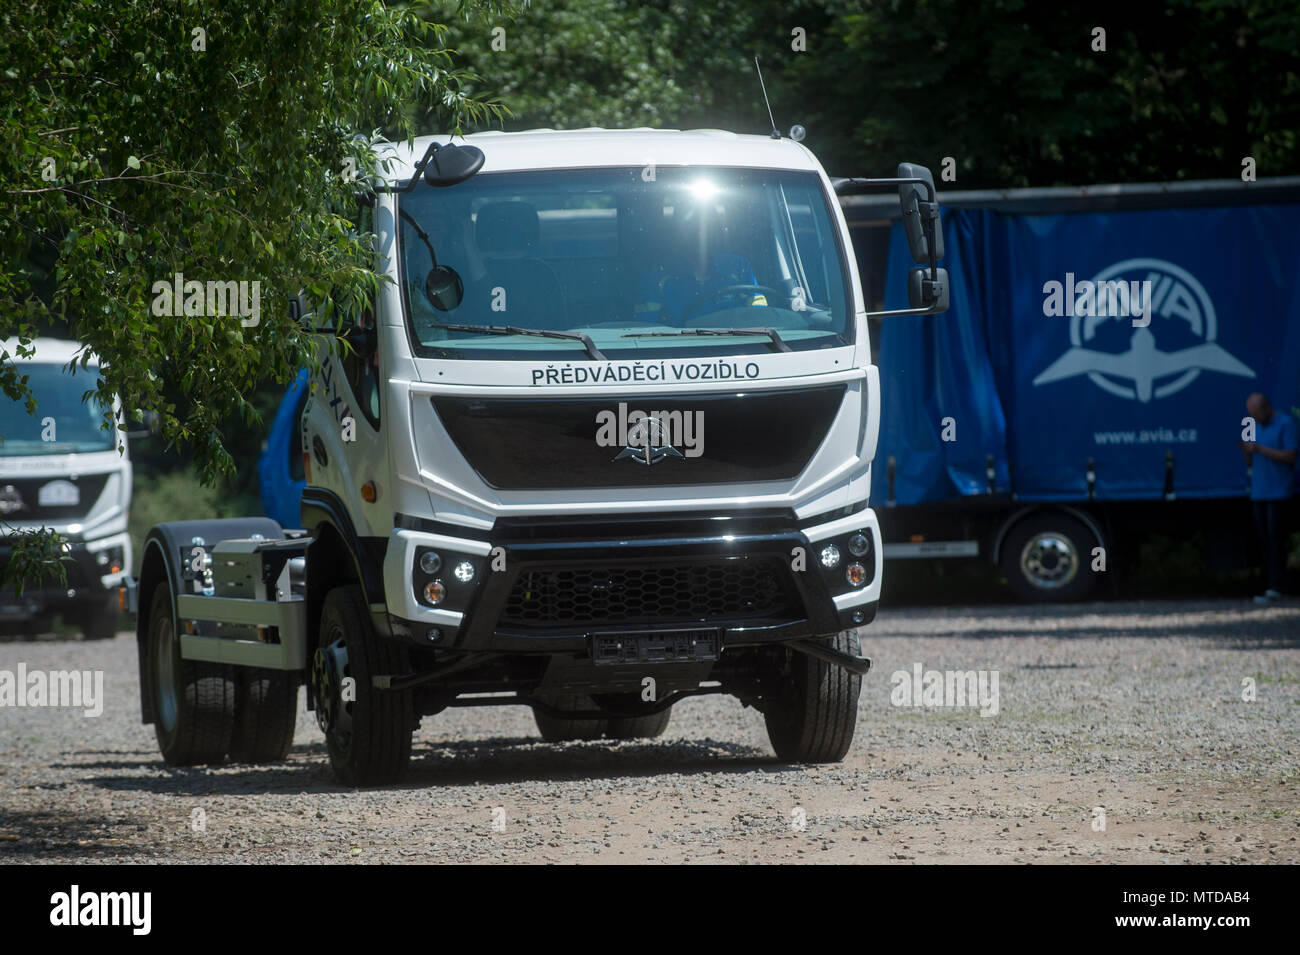 Prelouc, Czech Republic. 29th May, 2018. The AVIA D120 4x4 vehicle by the  AVIA Motors company was presented in Prelouc, Czech Republic, on May 29,  2018. Credit: Josef Vostarek/CTK Photo/Alamy Live News